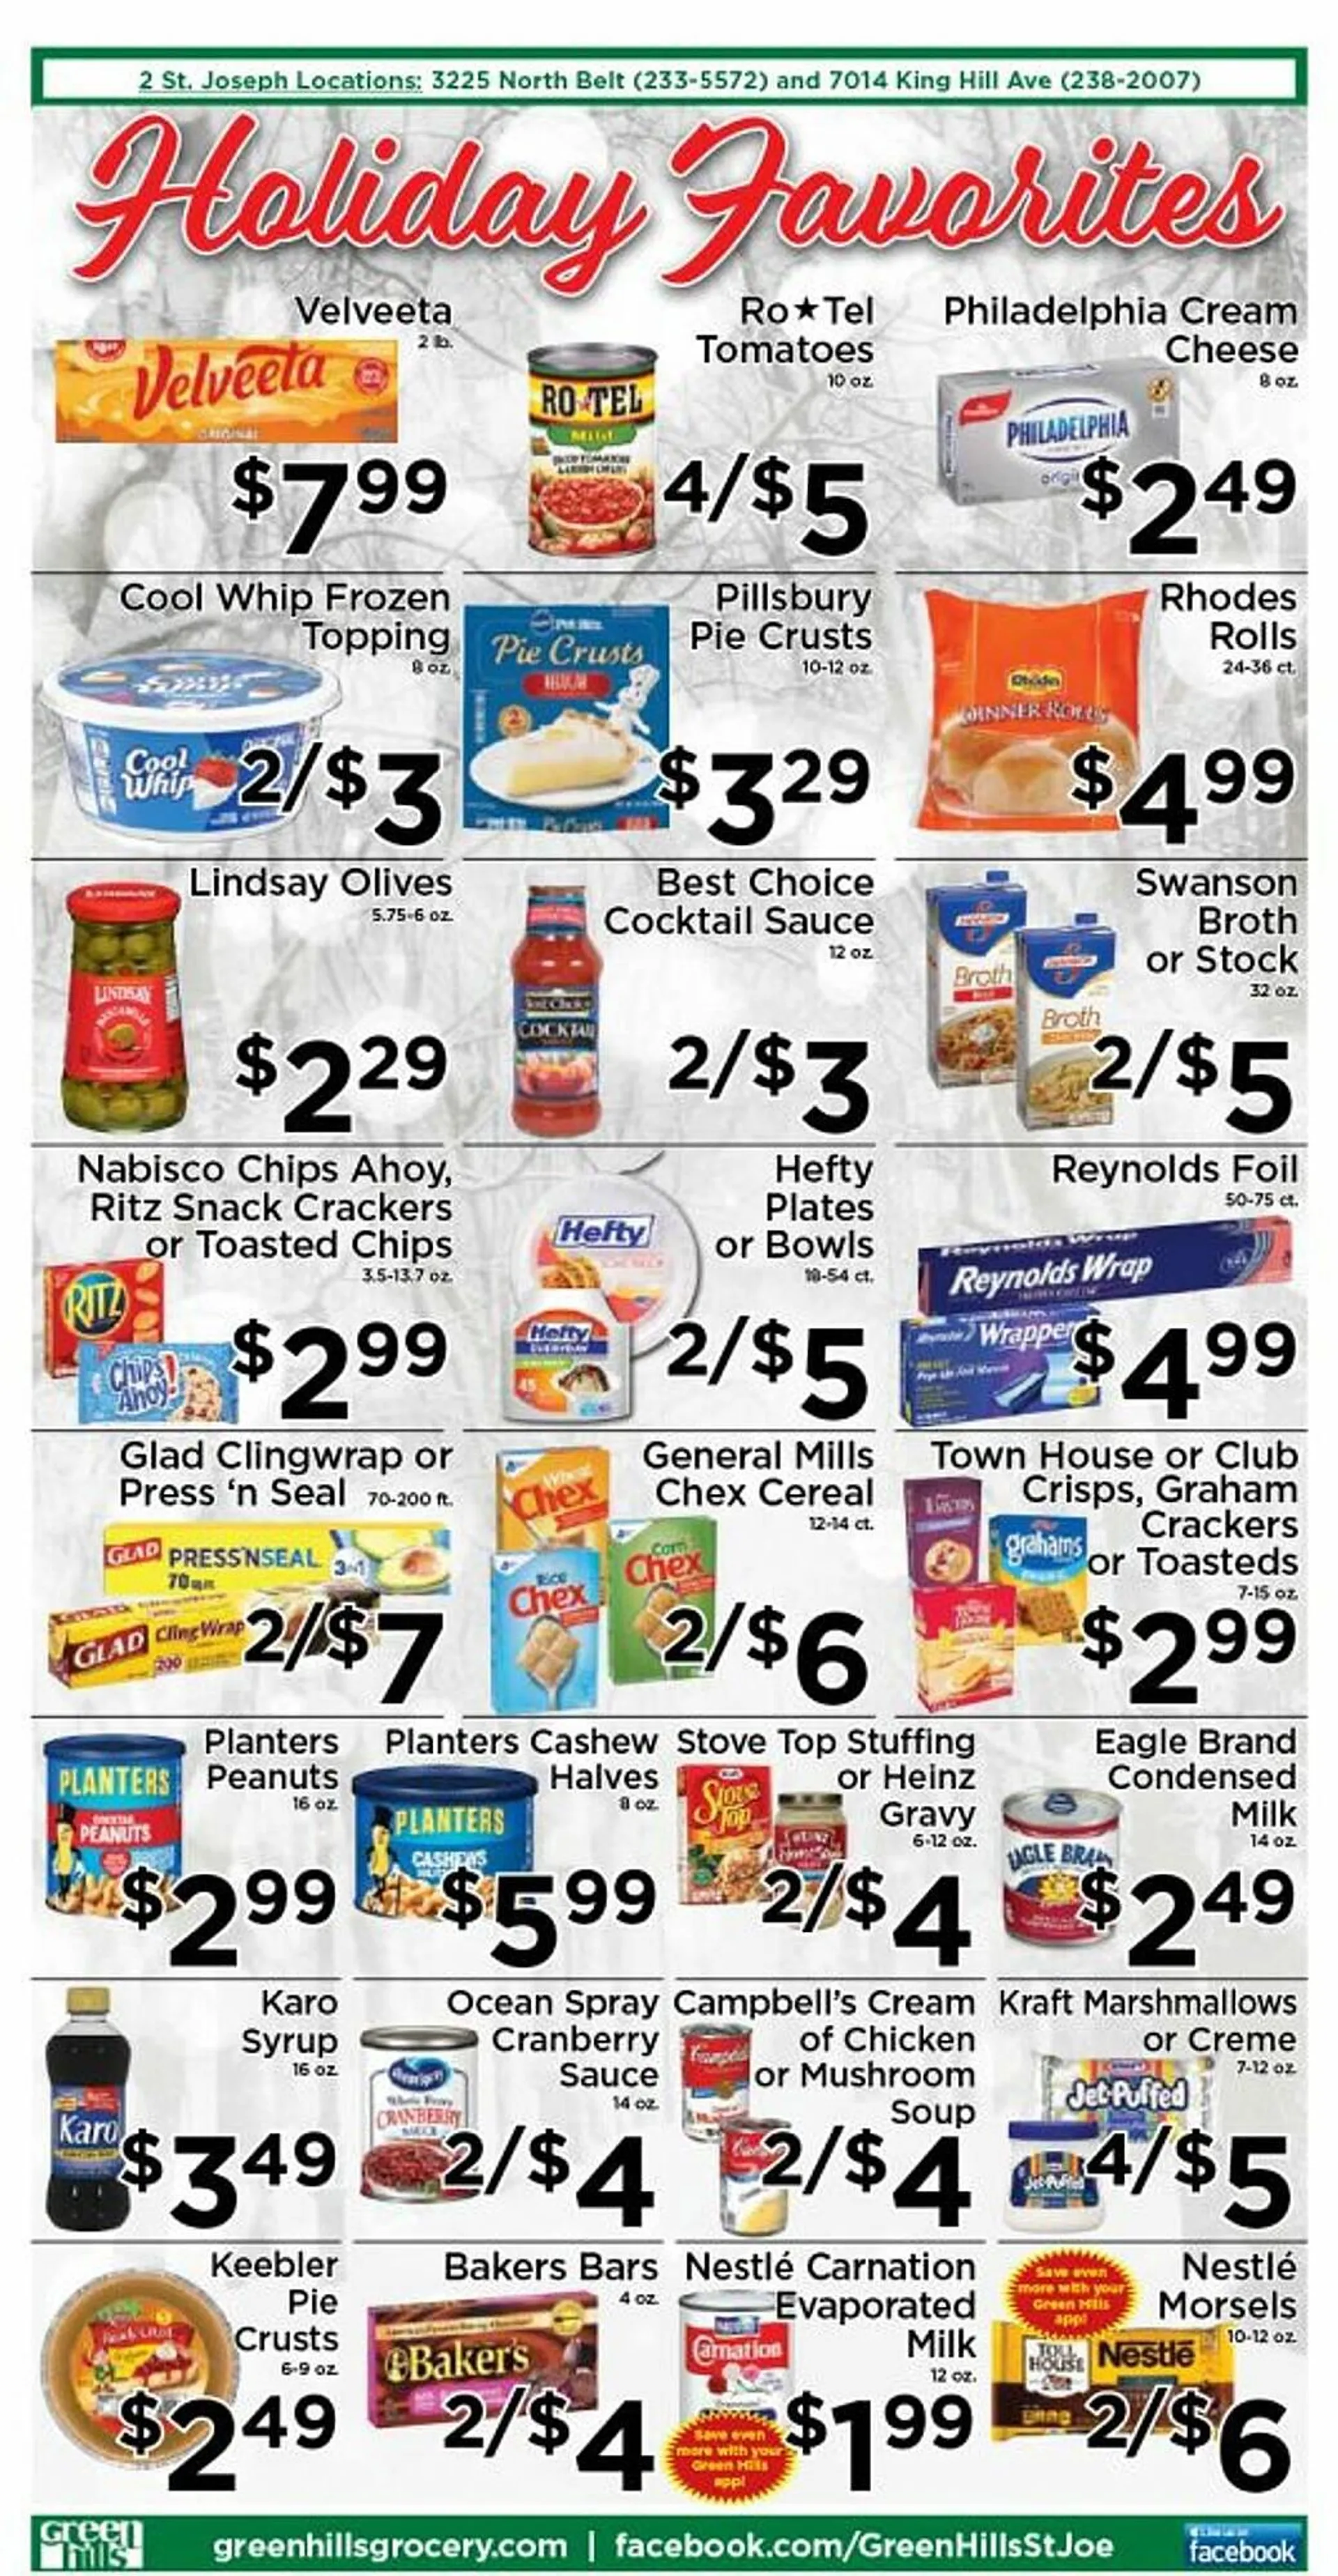 Green Hills Grocery ad - 7